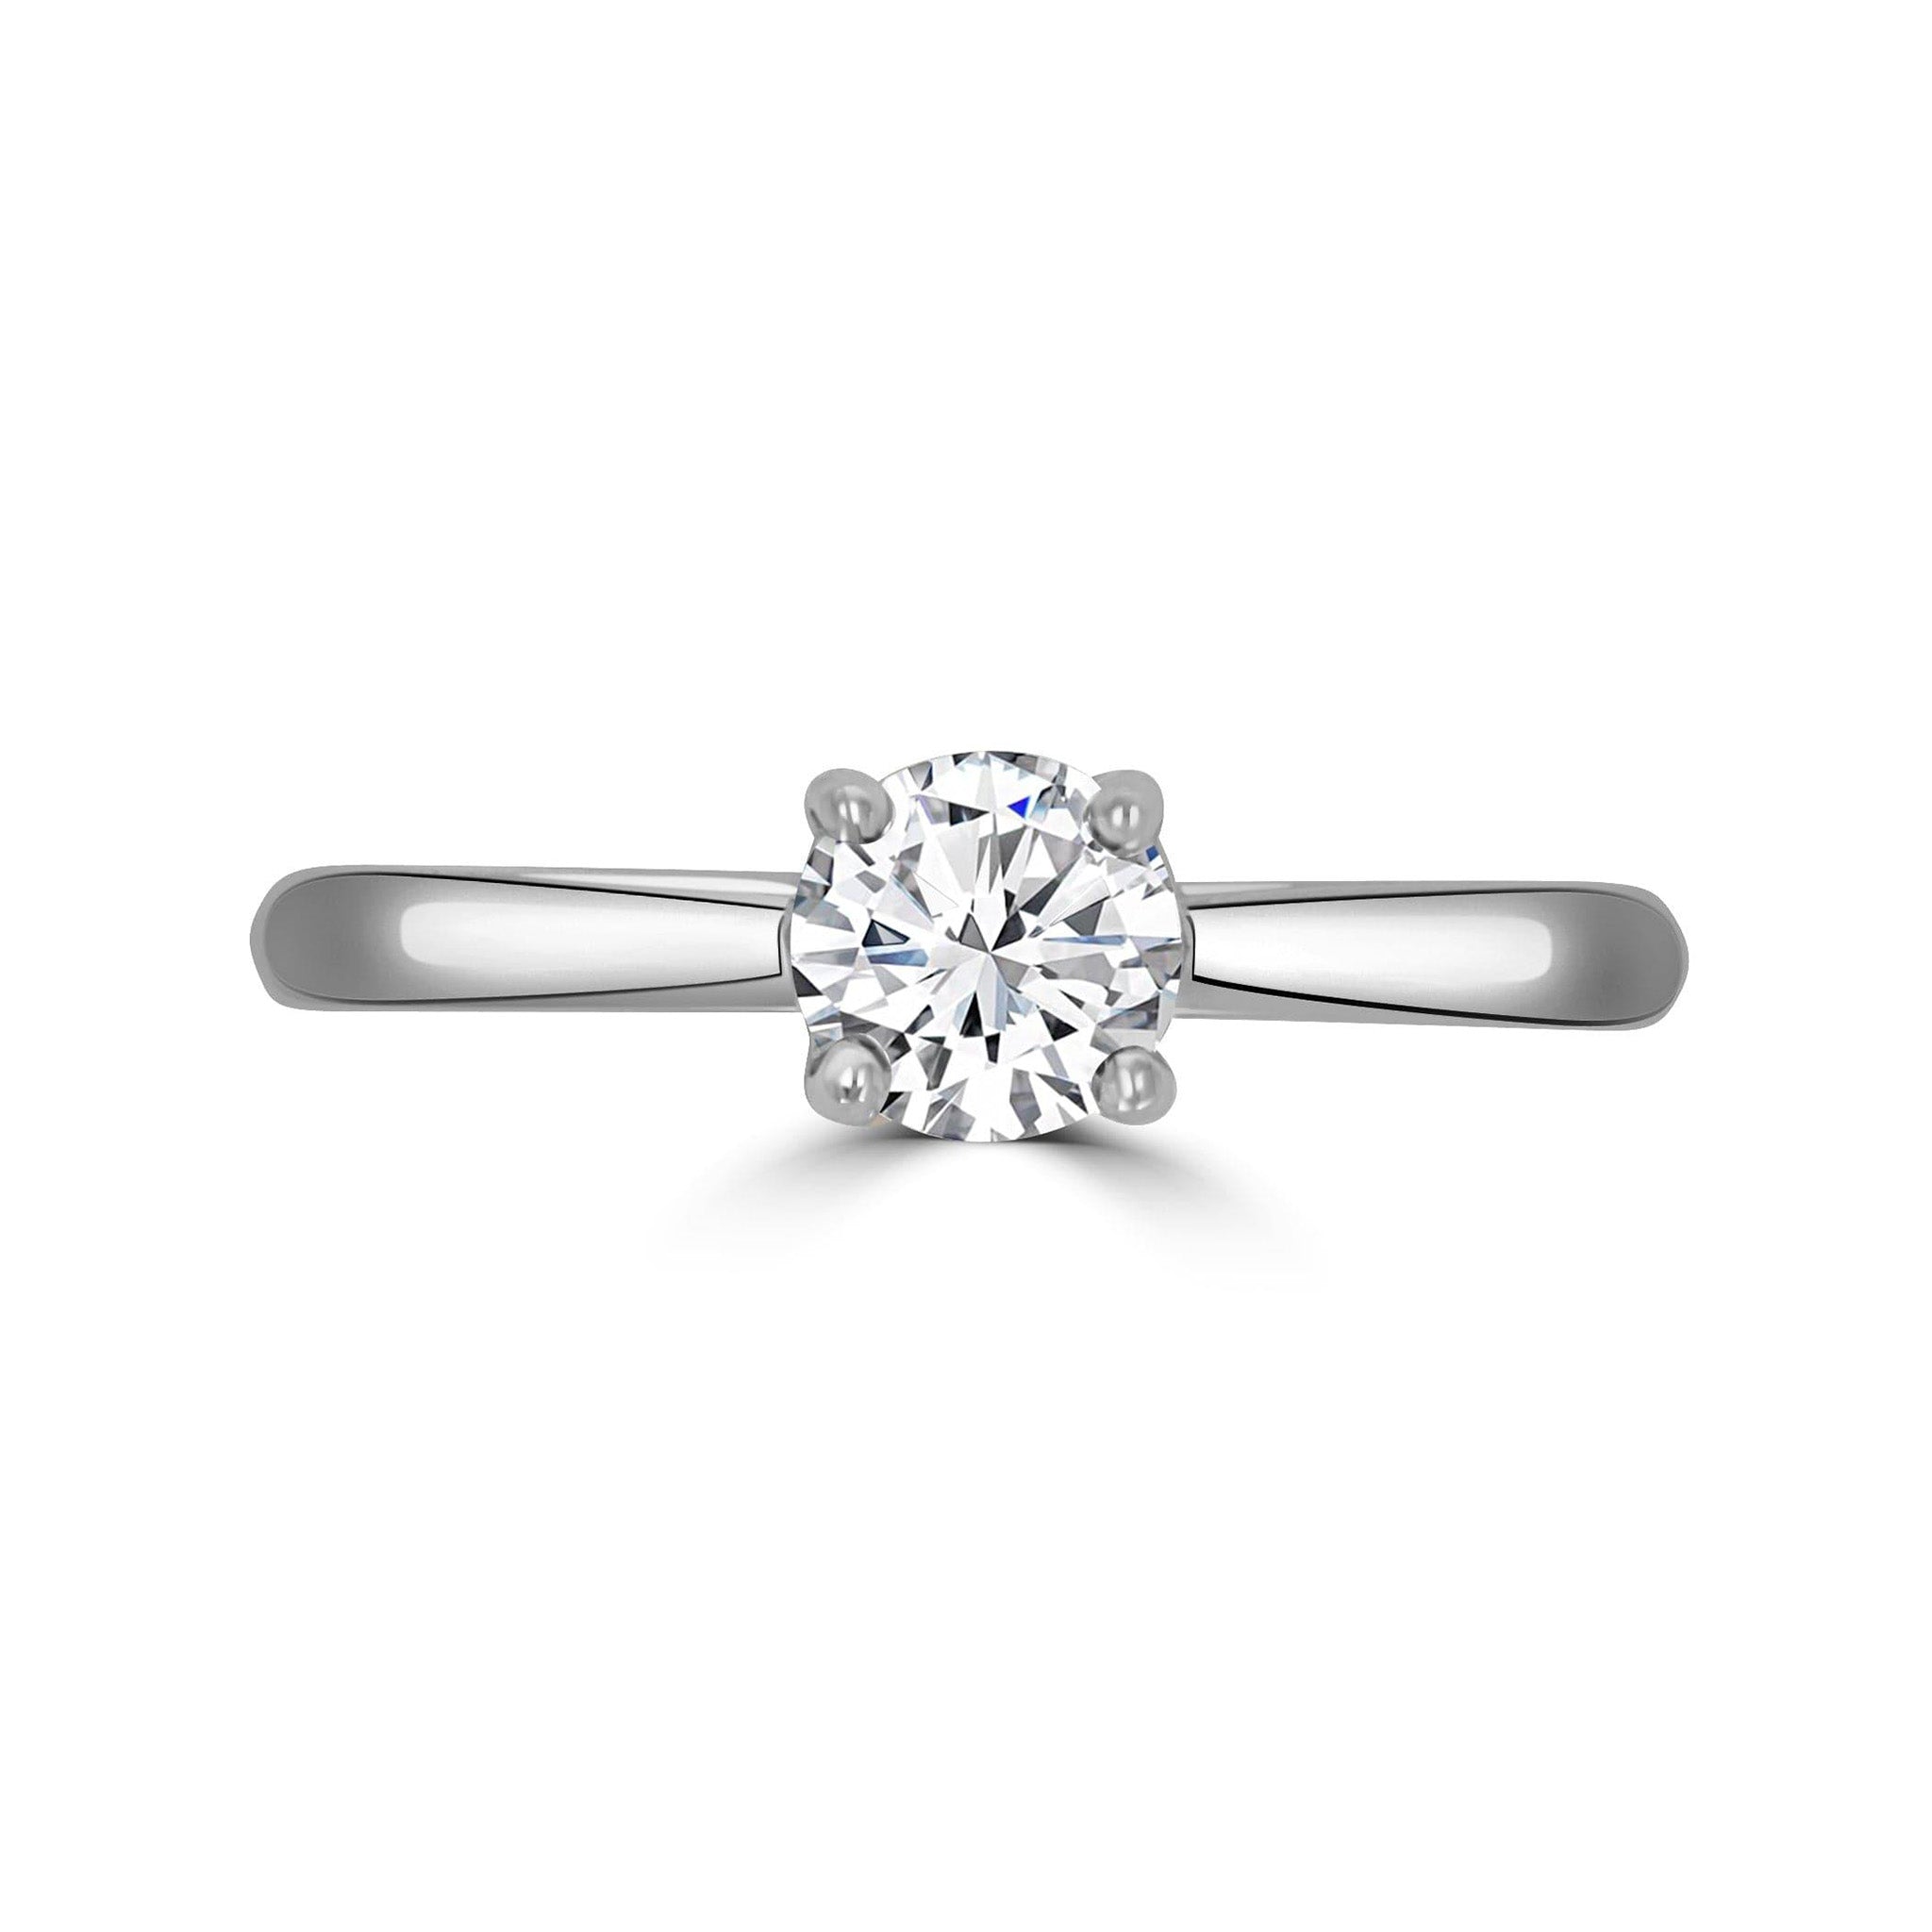 Tina Diamond Solitaire Engagement 4 Claw Ring